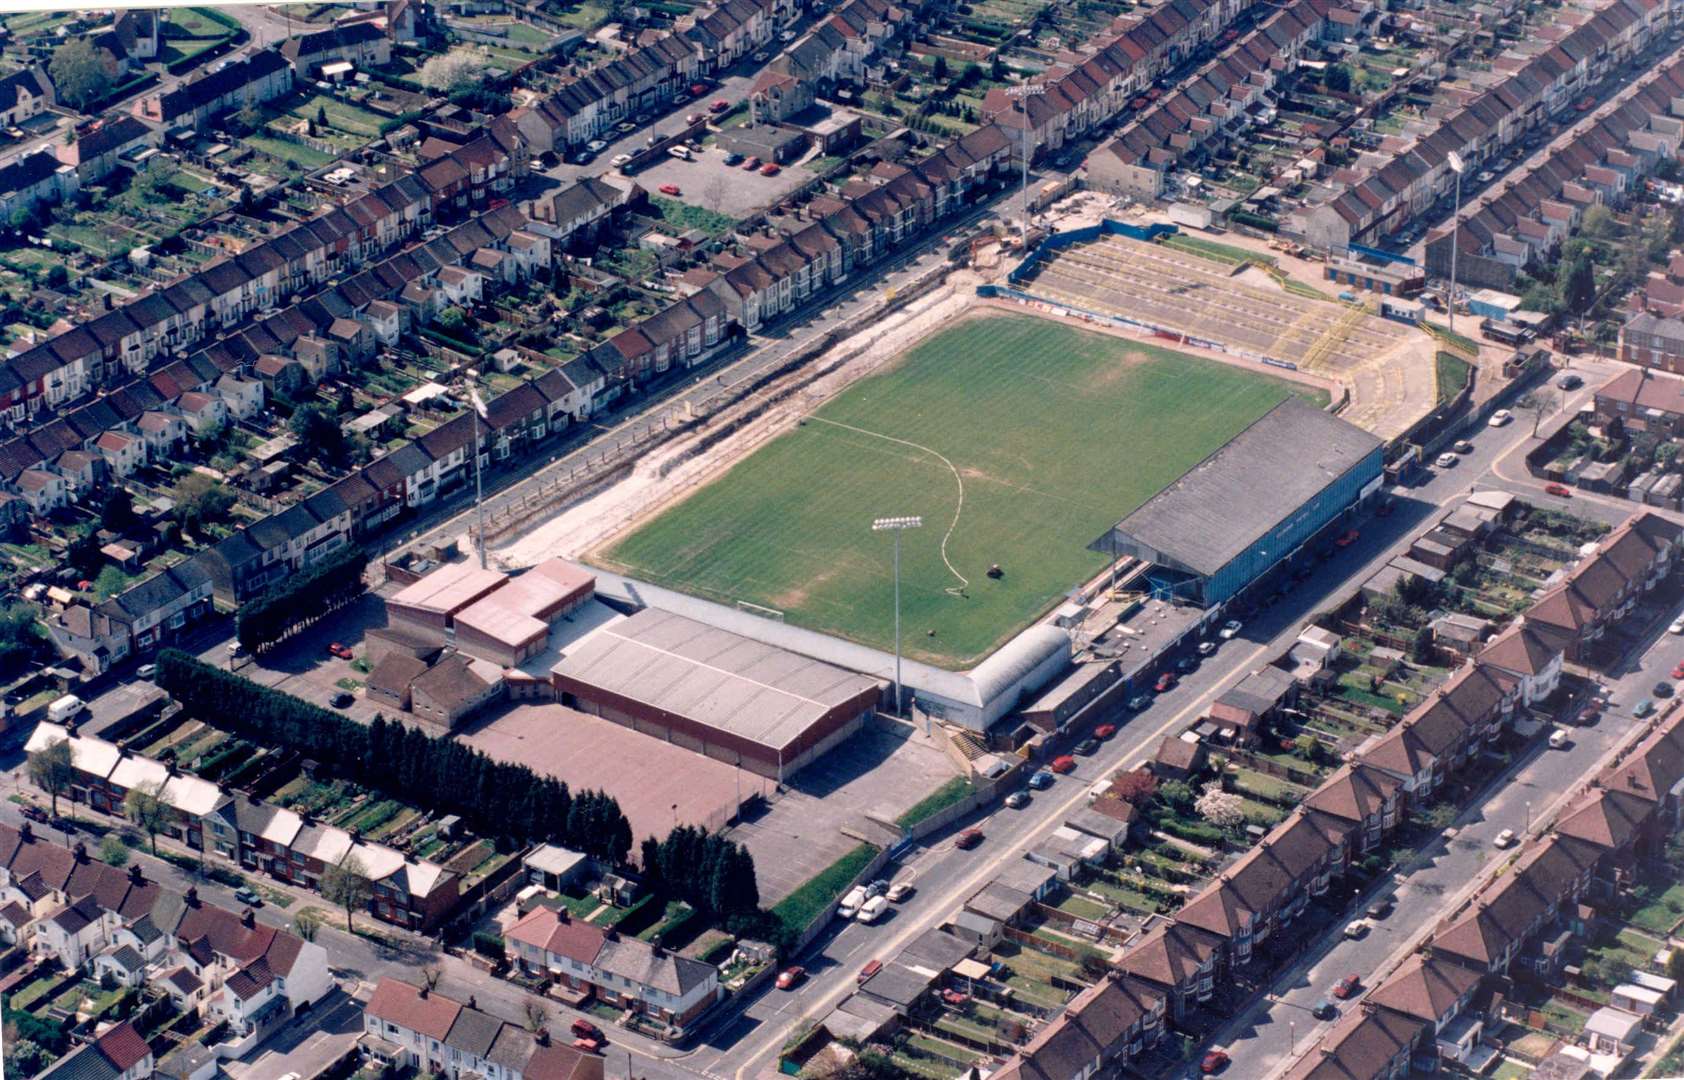 Priestfield Stadium undergoing work in 199. An extensive period of reconstruction took place with a new Gordon Road stand built first, with the main Medway Stand and new Rainham Ends being built shortly after.